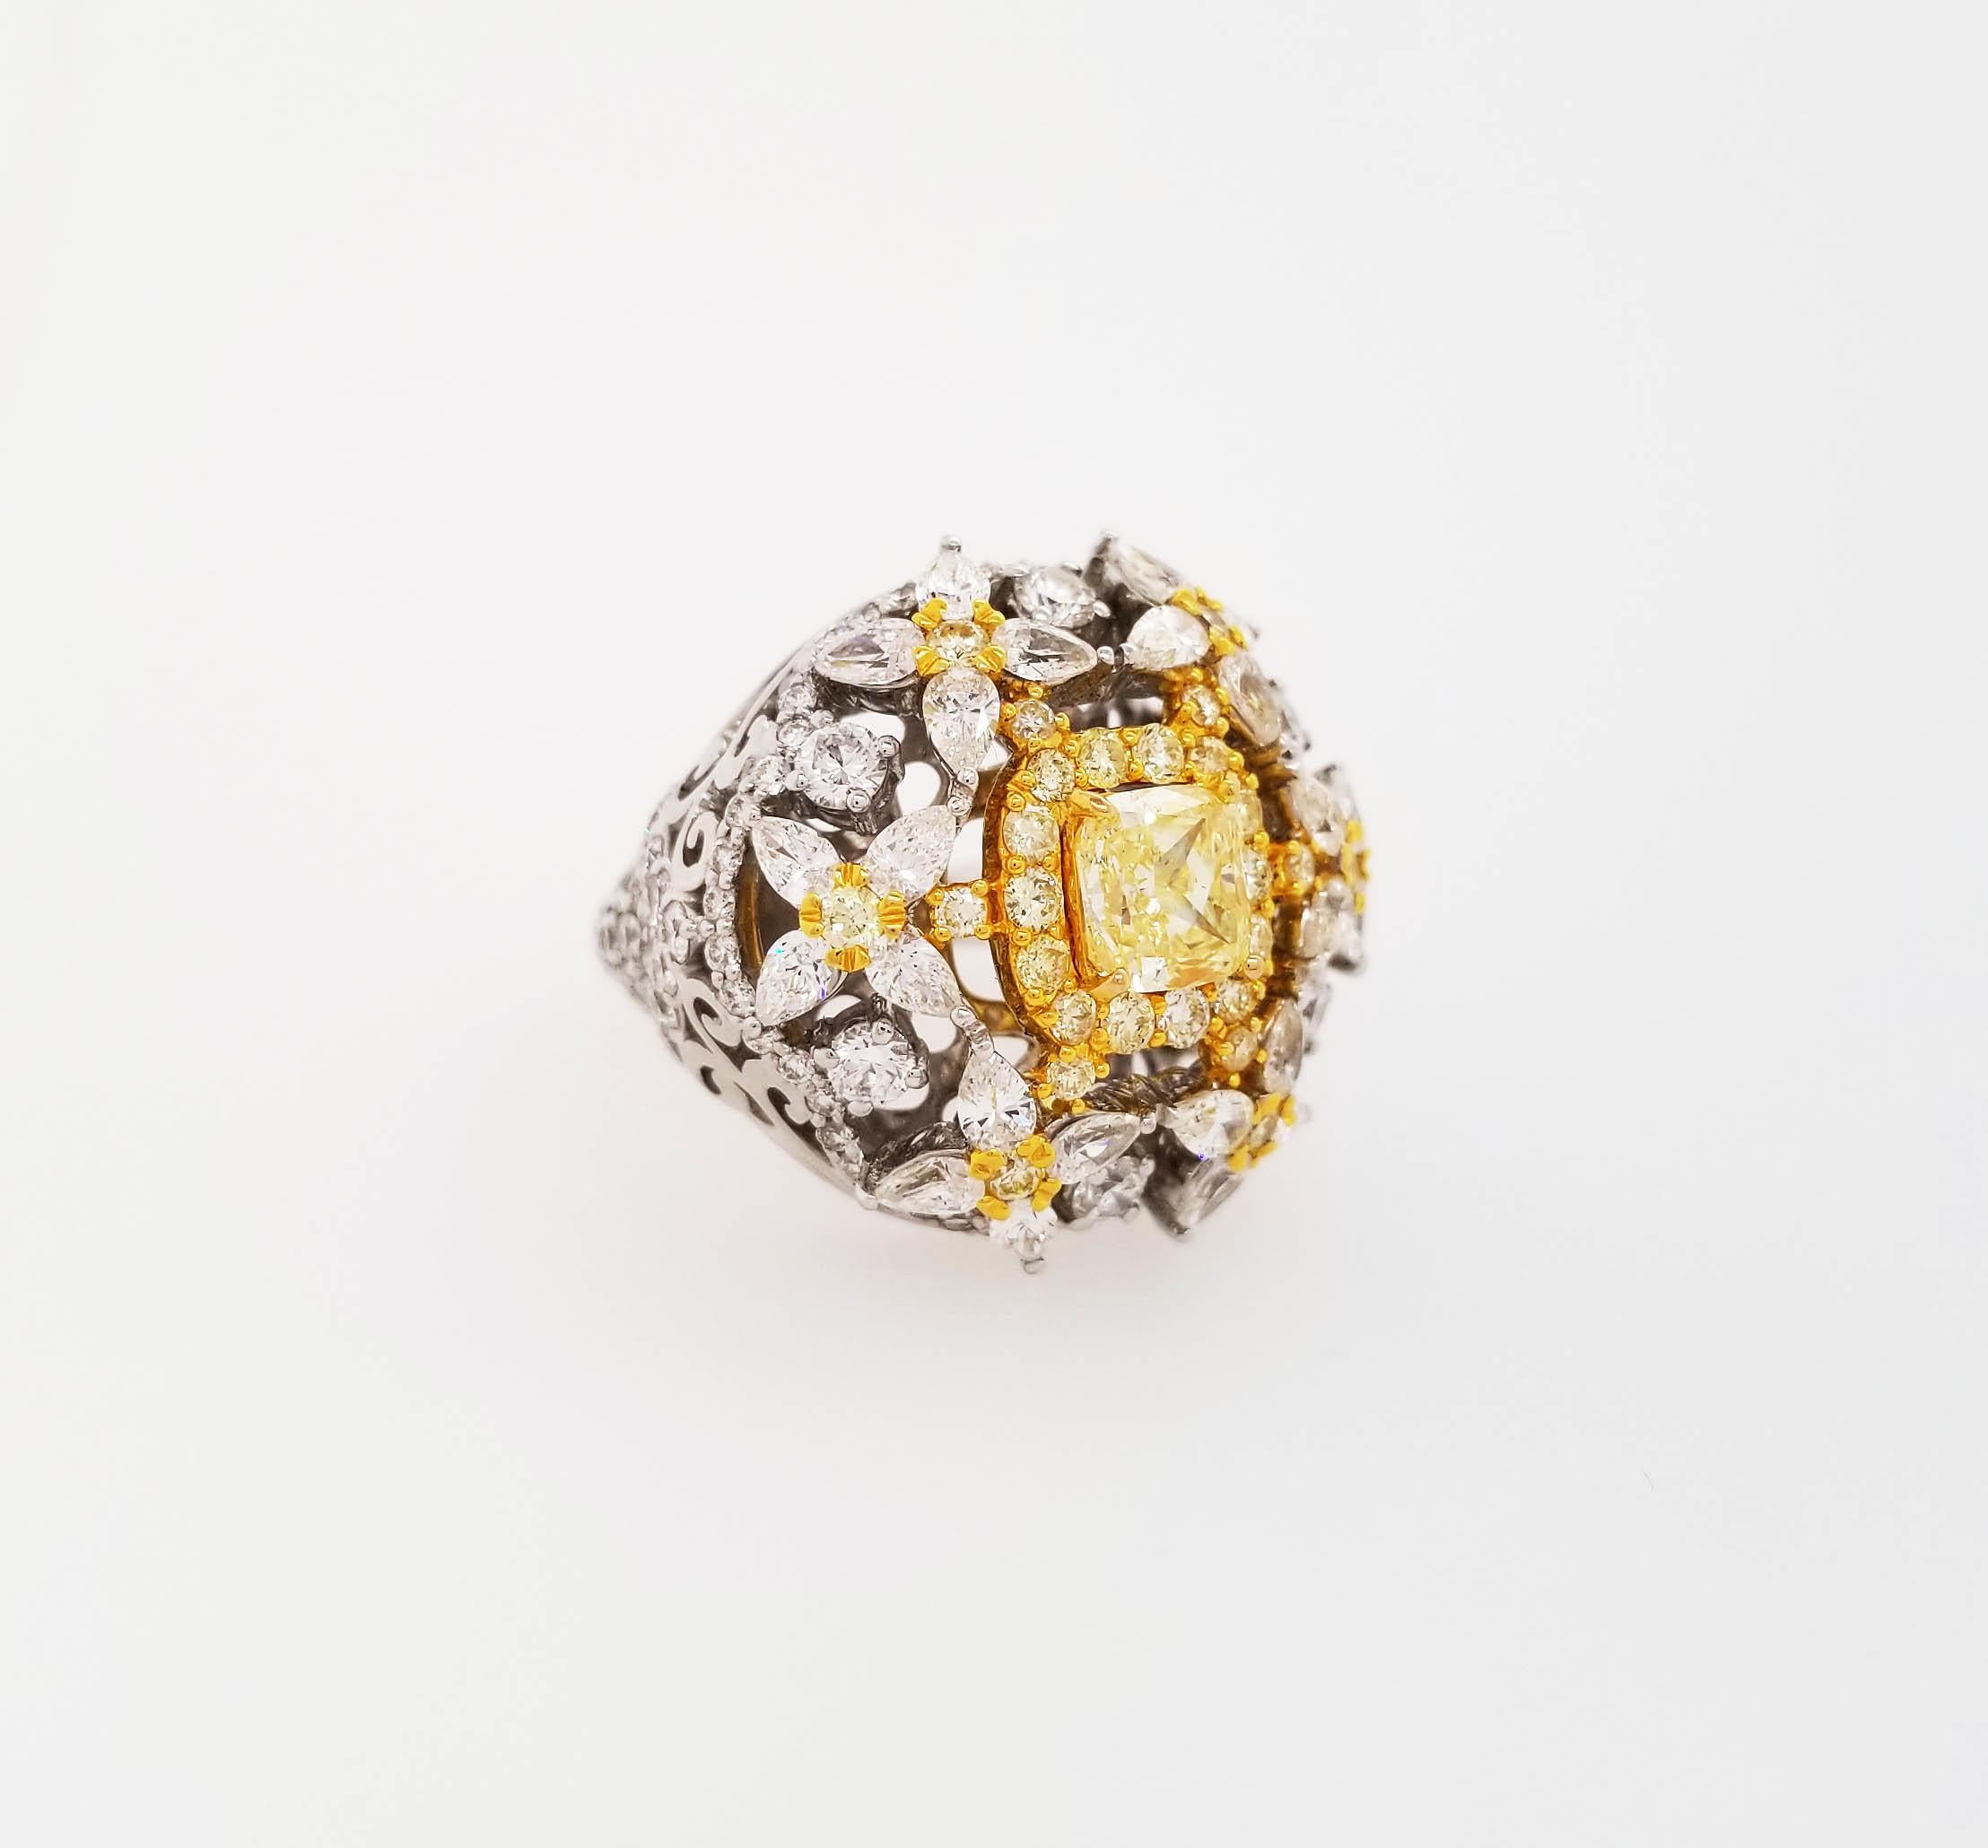 From Scarselli, this gorgeous cocktail ring featuring a 1.00 carat fancy yellow radiant shaped cut diamond, SI1 clarity GIA certified and set in an 18k yellow and white gold. The natural look of this ring is set off with a variety of sizes and